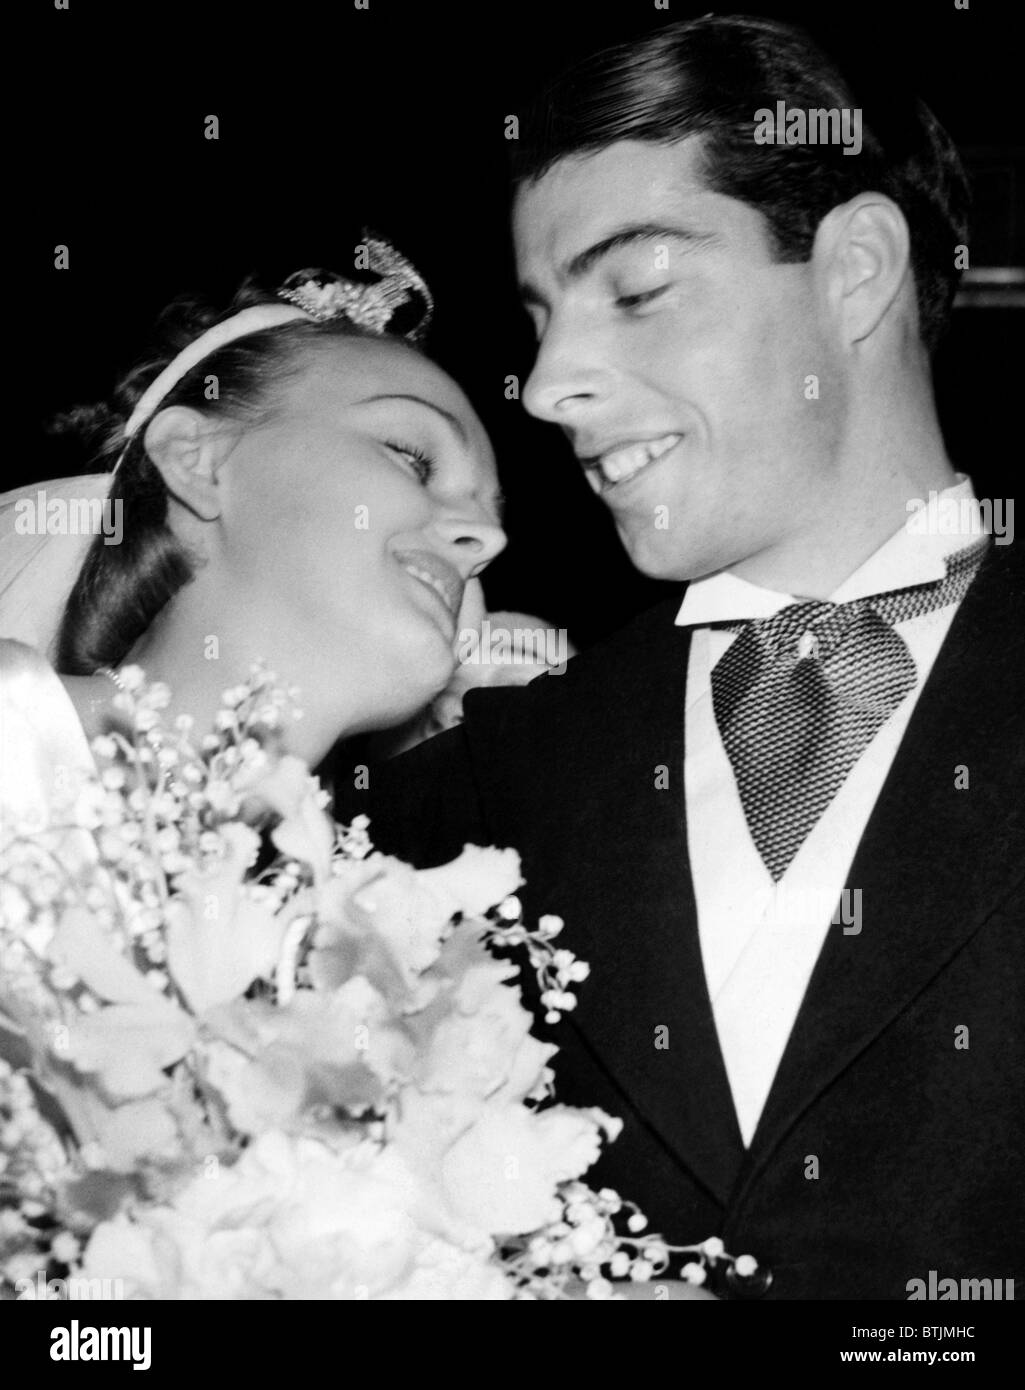 Dorothy Arnold and Joe DiMaggio on their wedding day, 1939. Courtesy: CSU Archives/Everett Collection Stock Photo